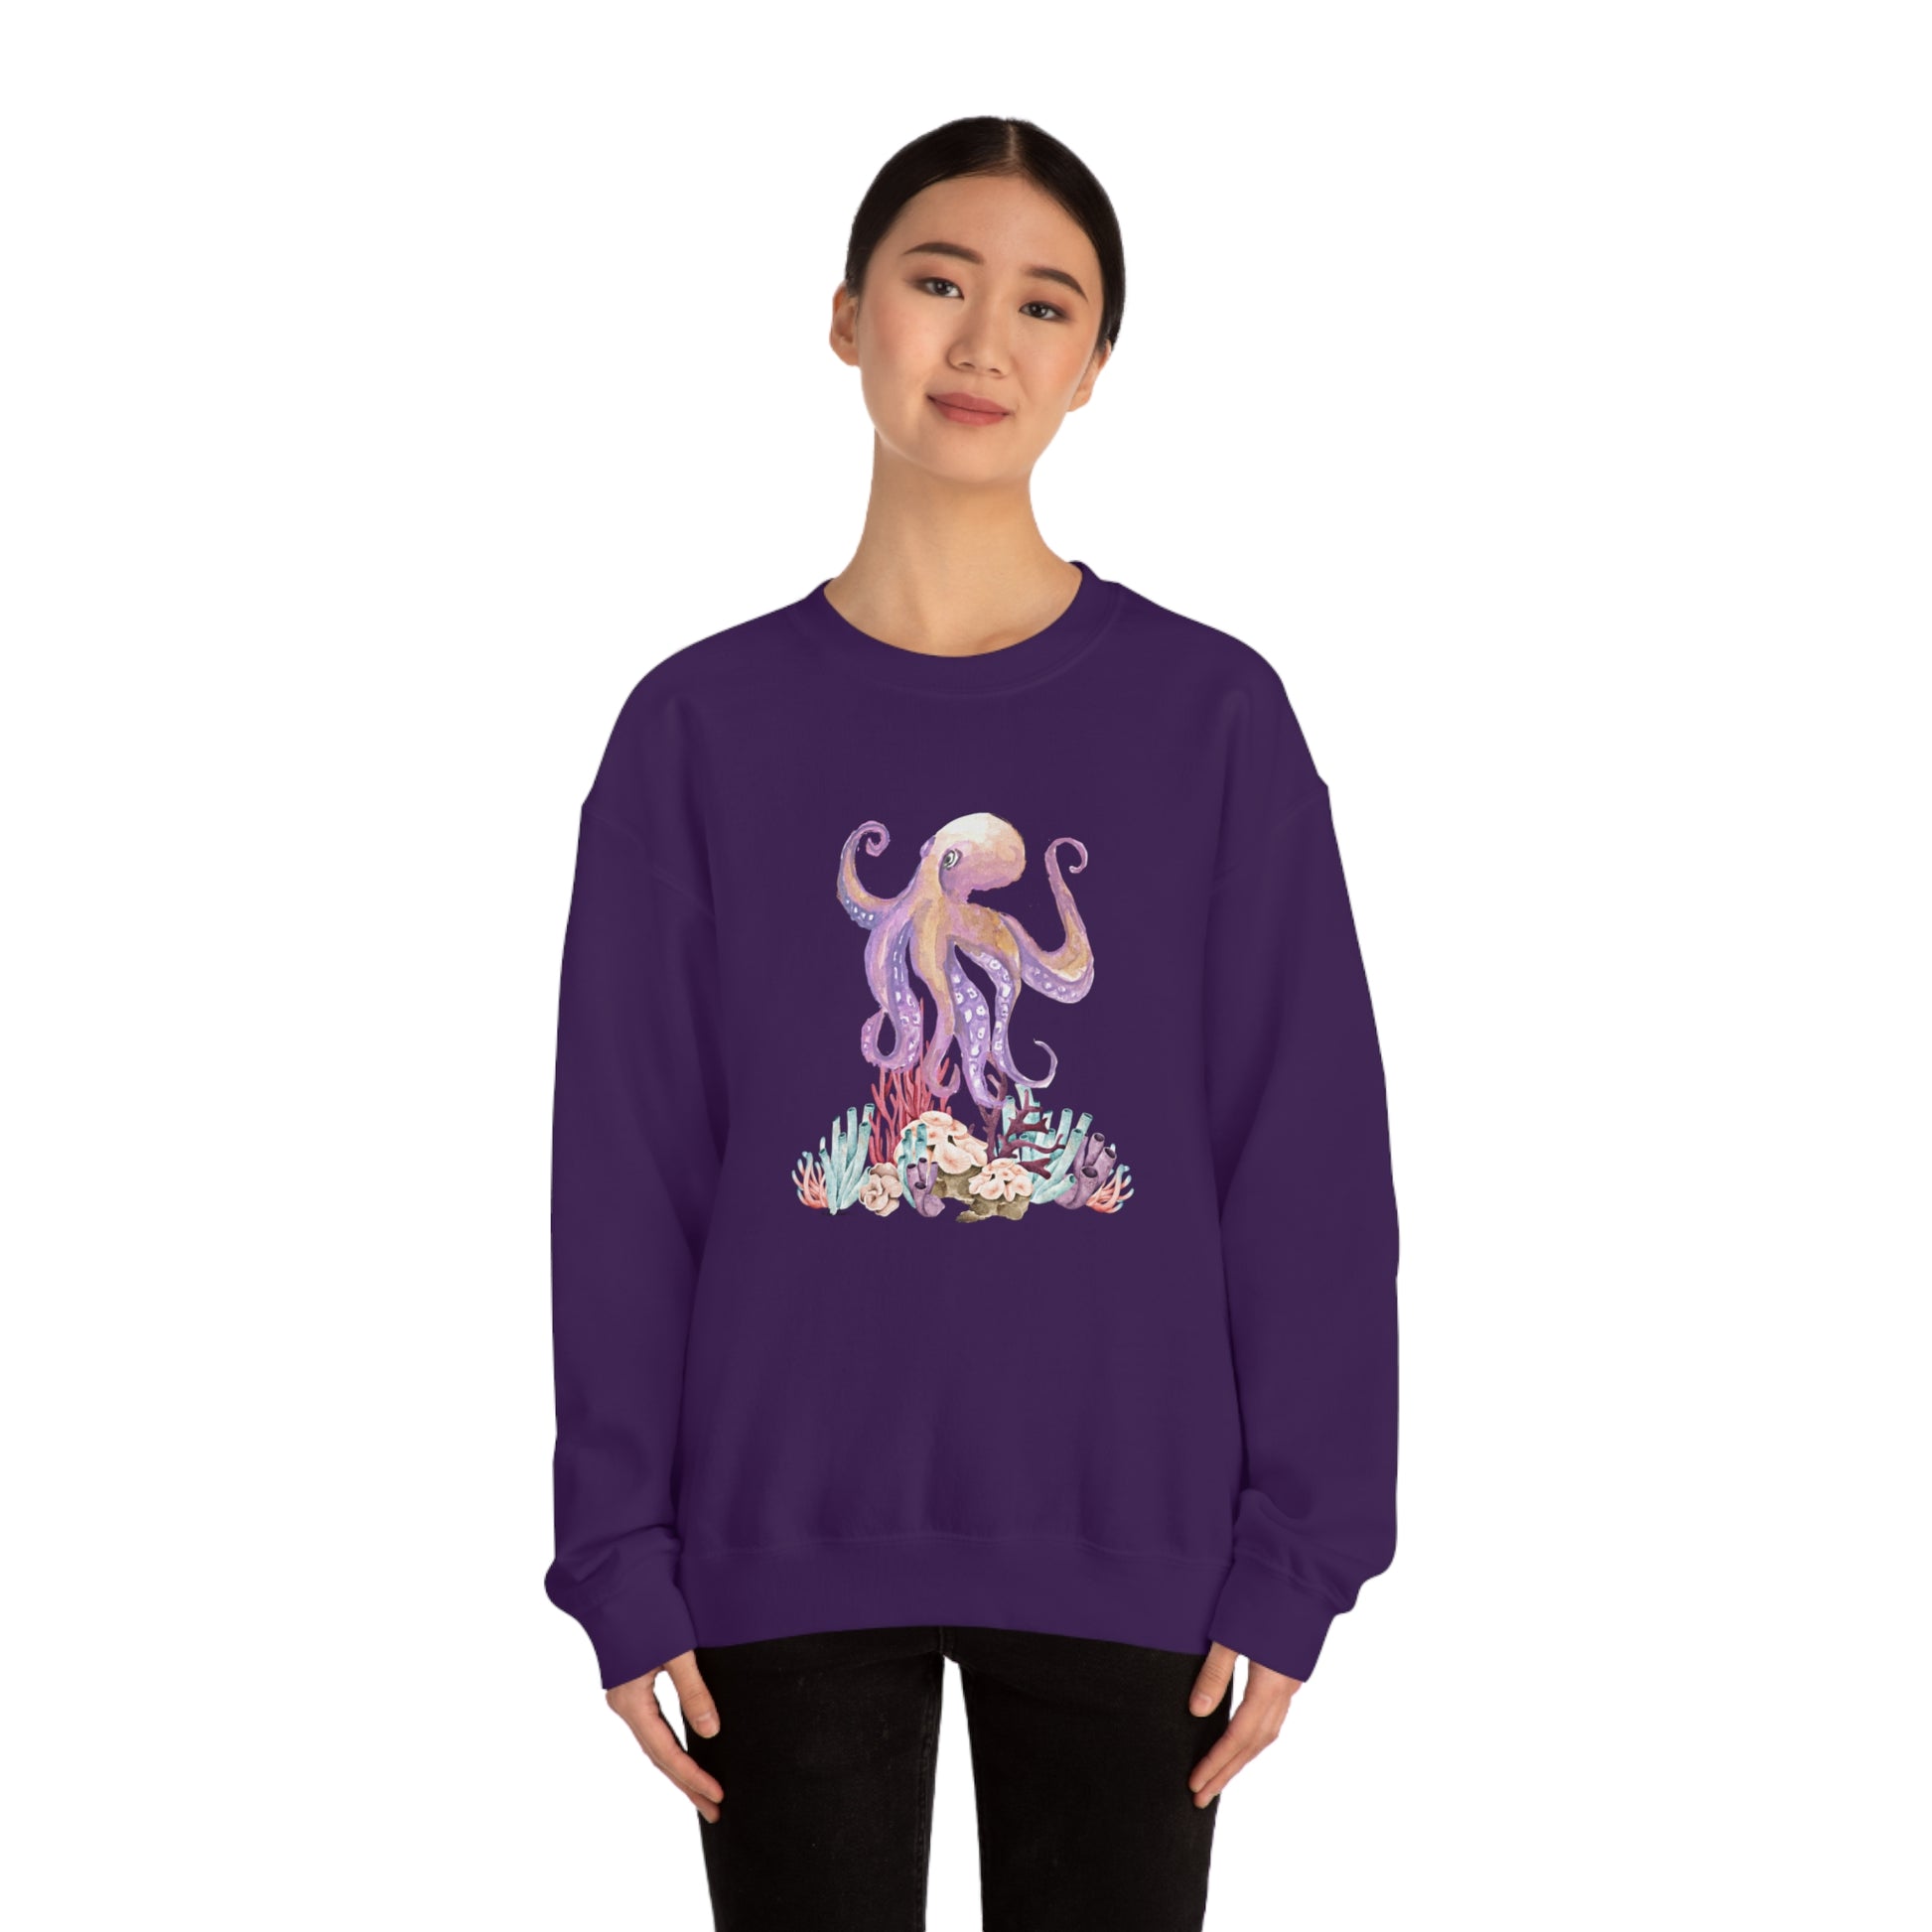 Mock up of a slender woman wearing the Purple shirt